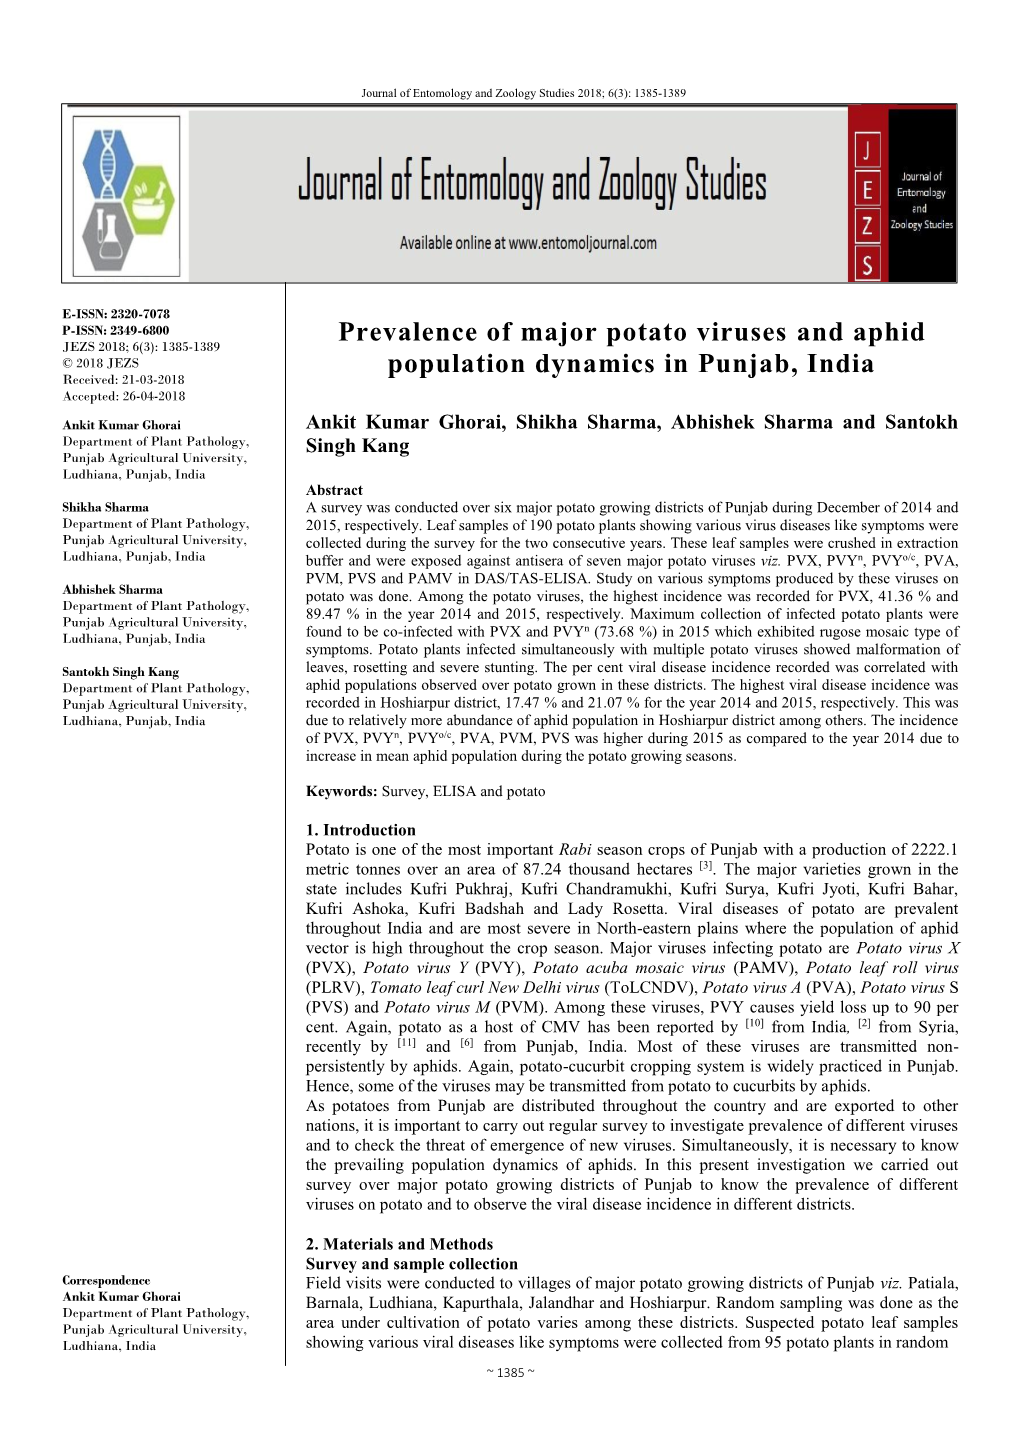 Prevalence of Major Potato Viruses and Aphid Population Dynamics In